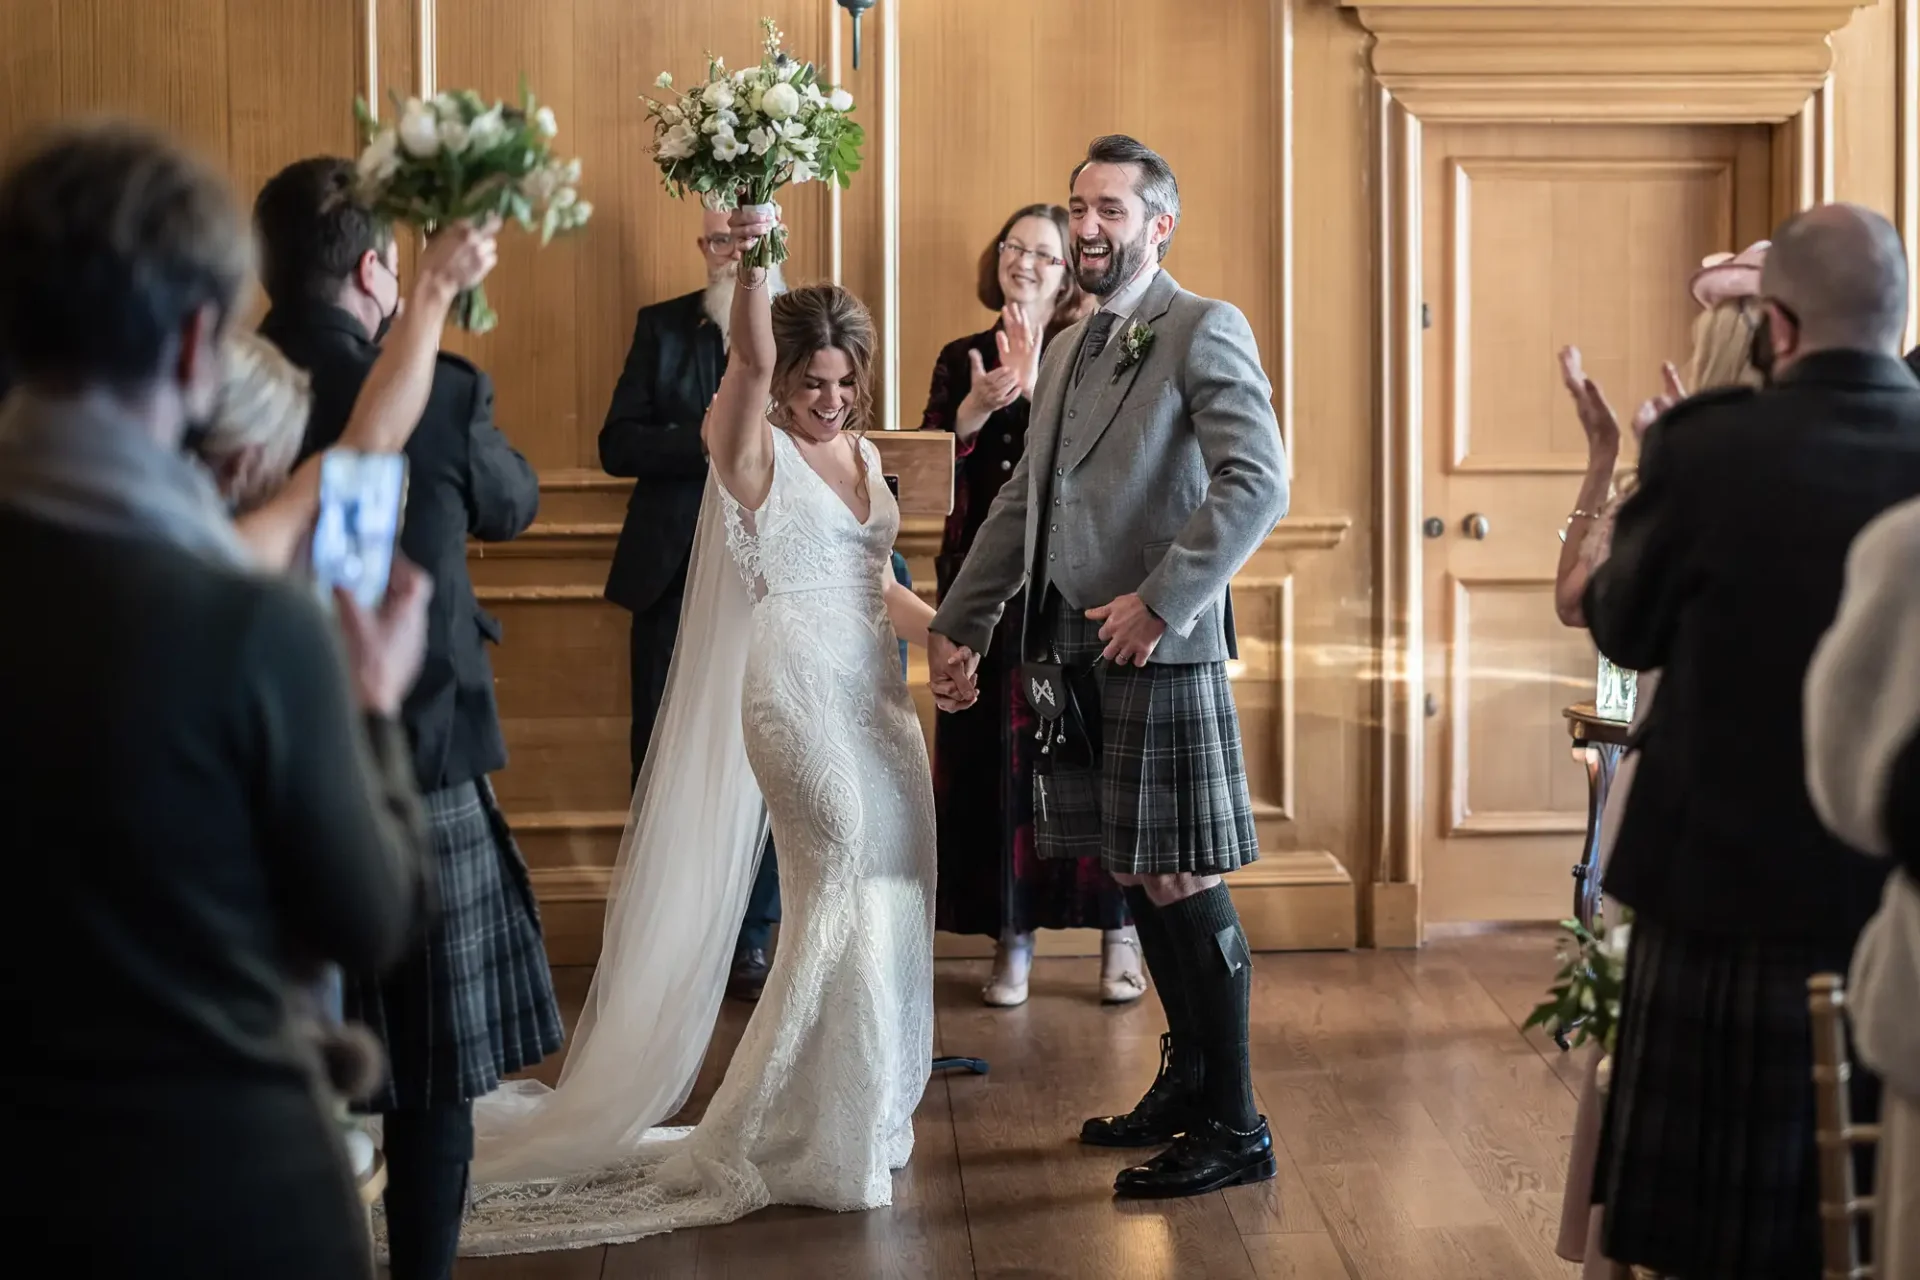 A joyful bride and groom walk down the aisle while guests applaud, the groom in a kilt and the bride holding a bouquet, both smiling broadly.